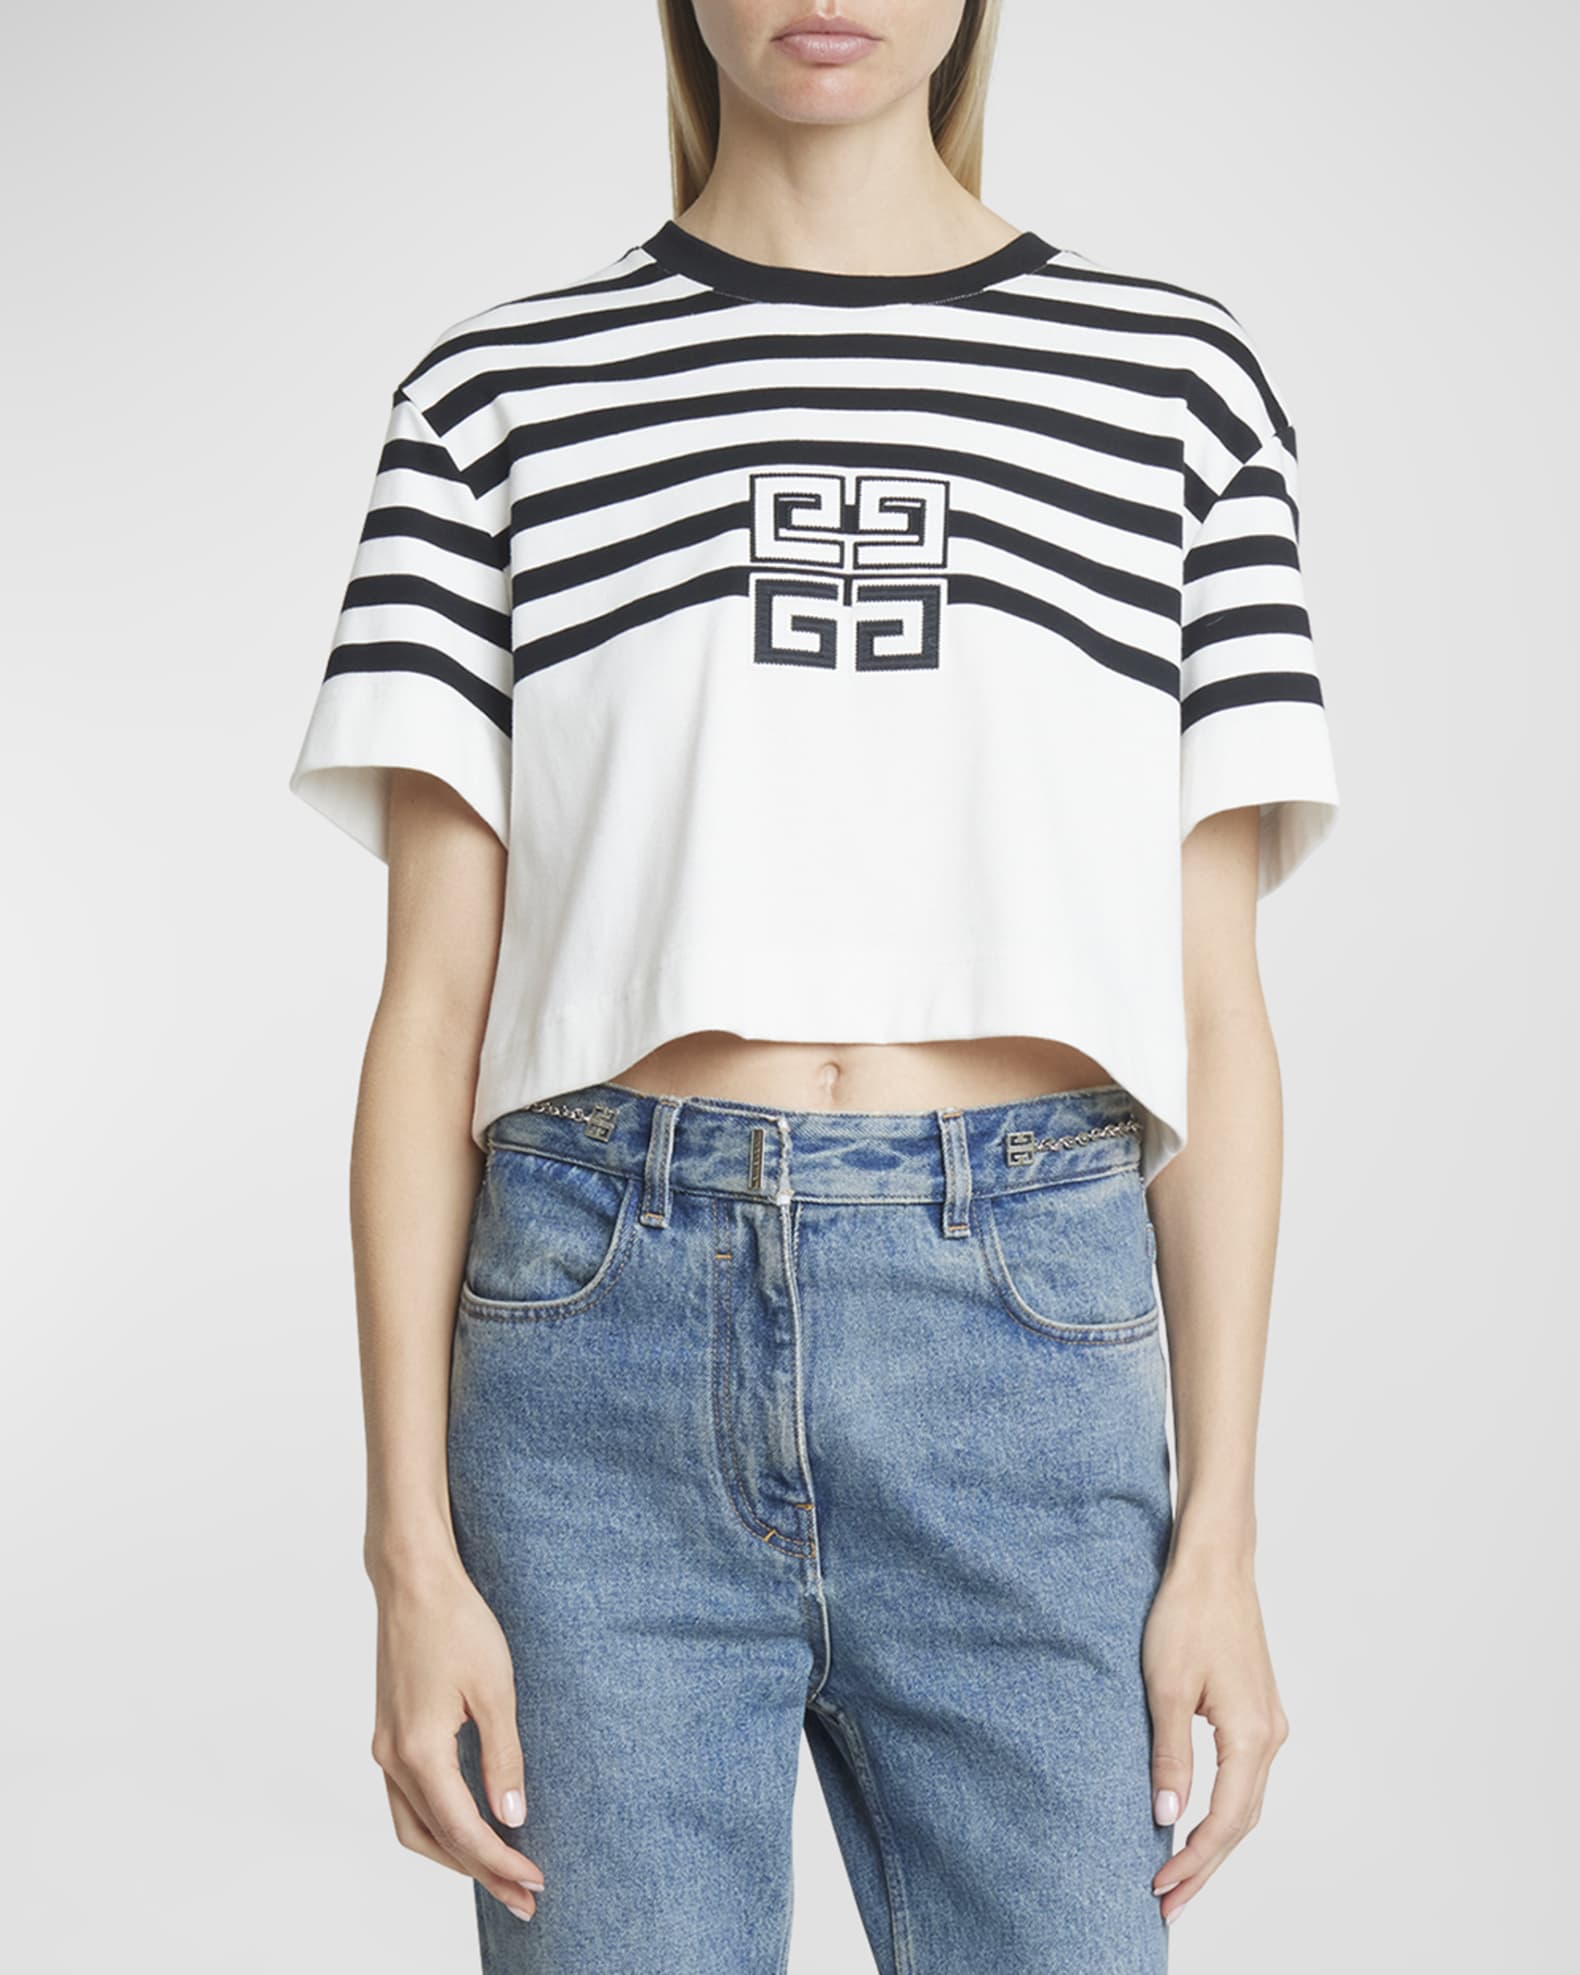 Givenchy 4G embroidered cotton shirt - White